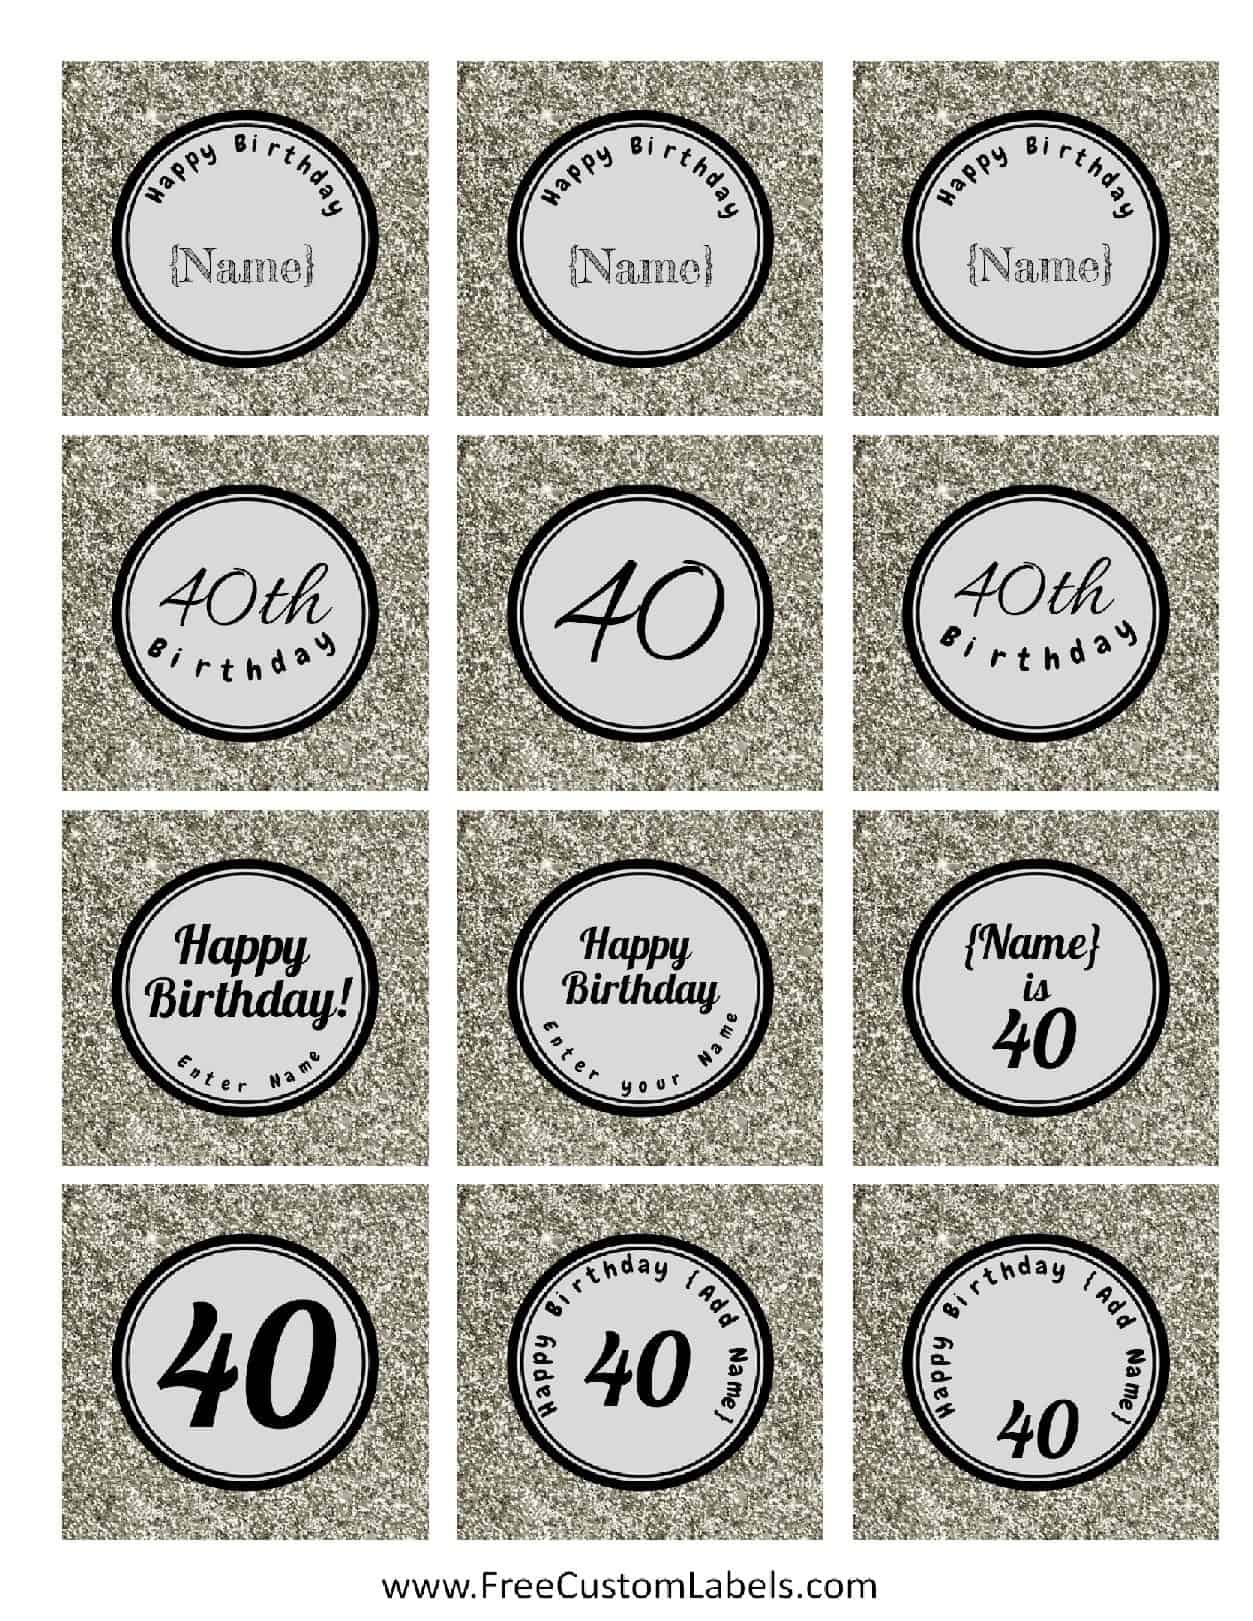 40th Birthday Cupcake Toppers Free Customizable